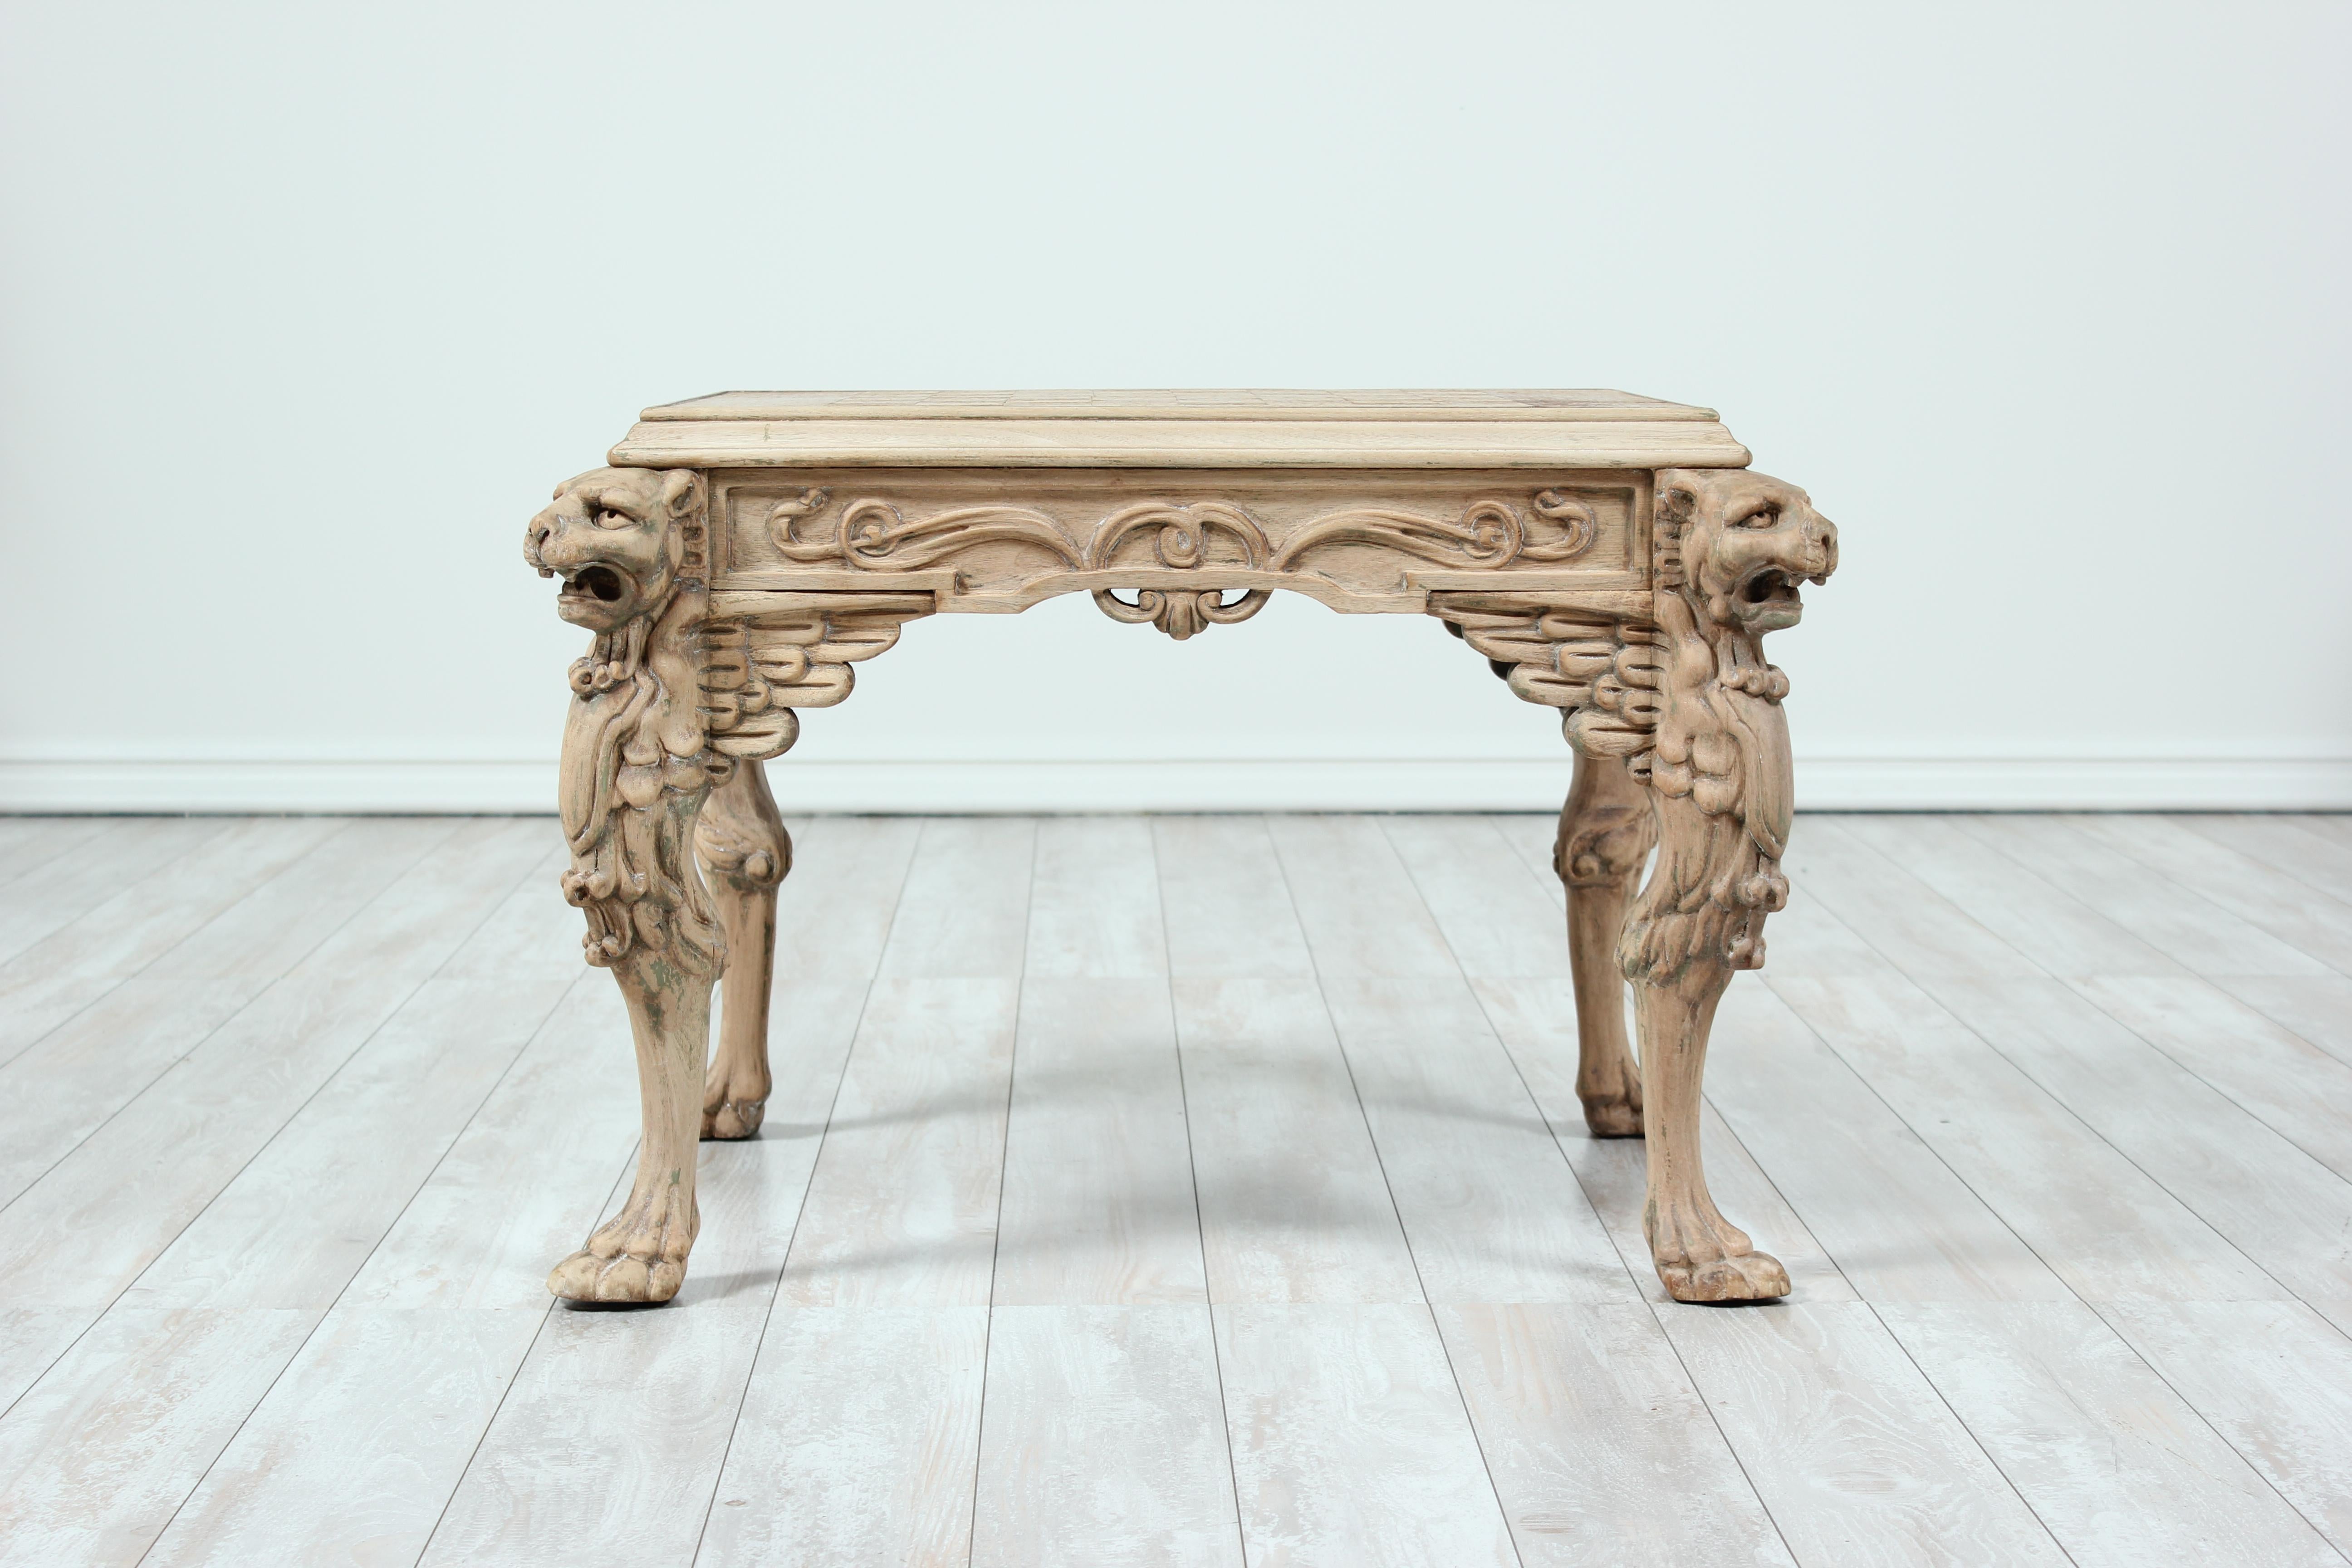 Handsome Italian, 1940s painted and carved wood game table in the Renaissance Revival style. The table features nicely carved lion heads and paw feet with a game top made of cork. The proportions of this table facilitate it to be used as a coffee or